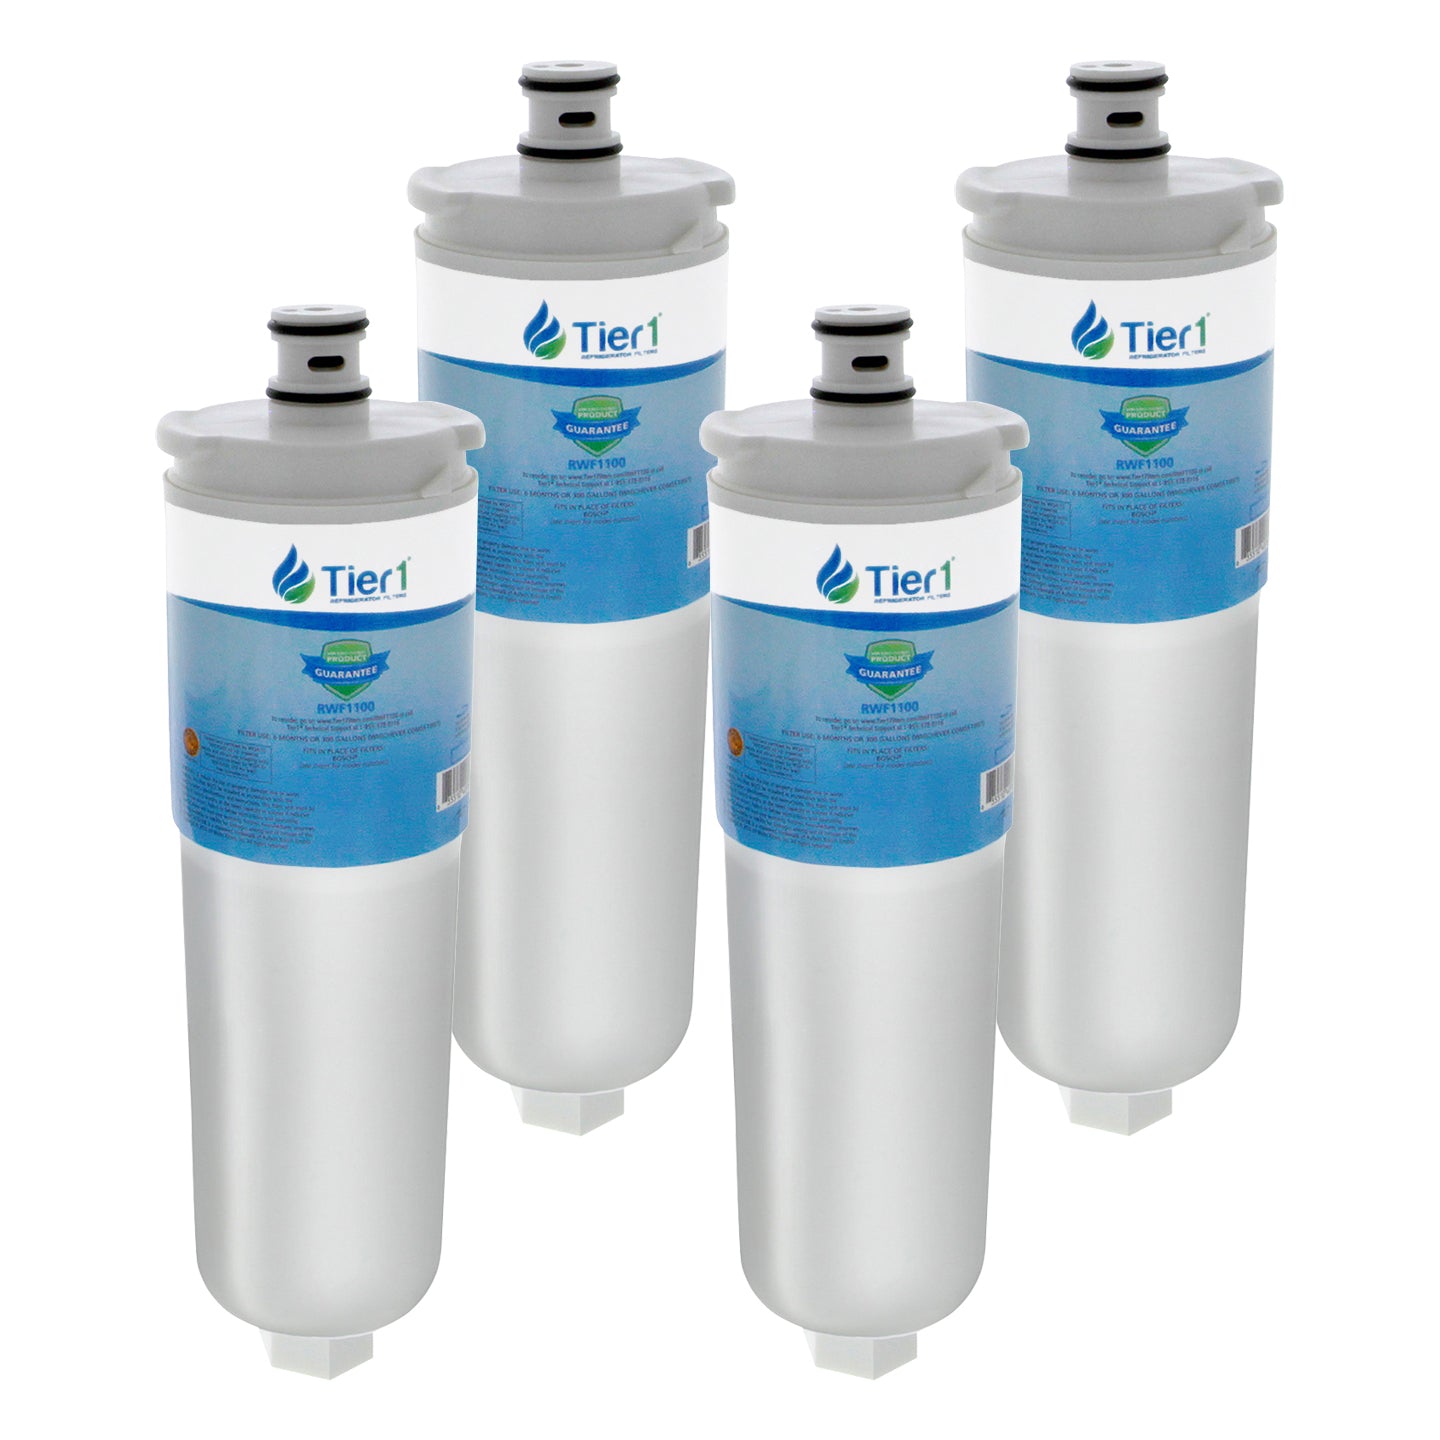 Tier1 Bosch 640565 / CS-52 Refrigerator Water Filter Replacement Comparable